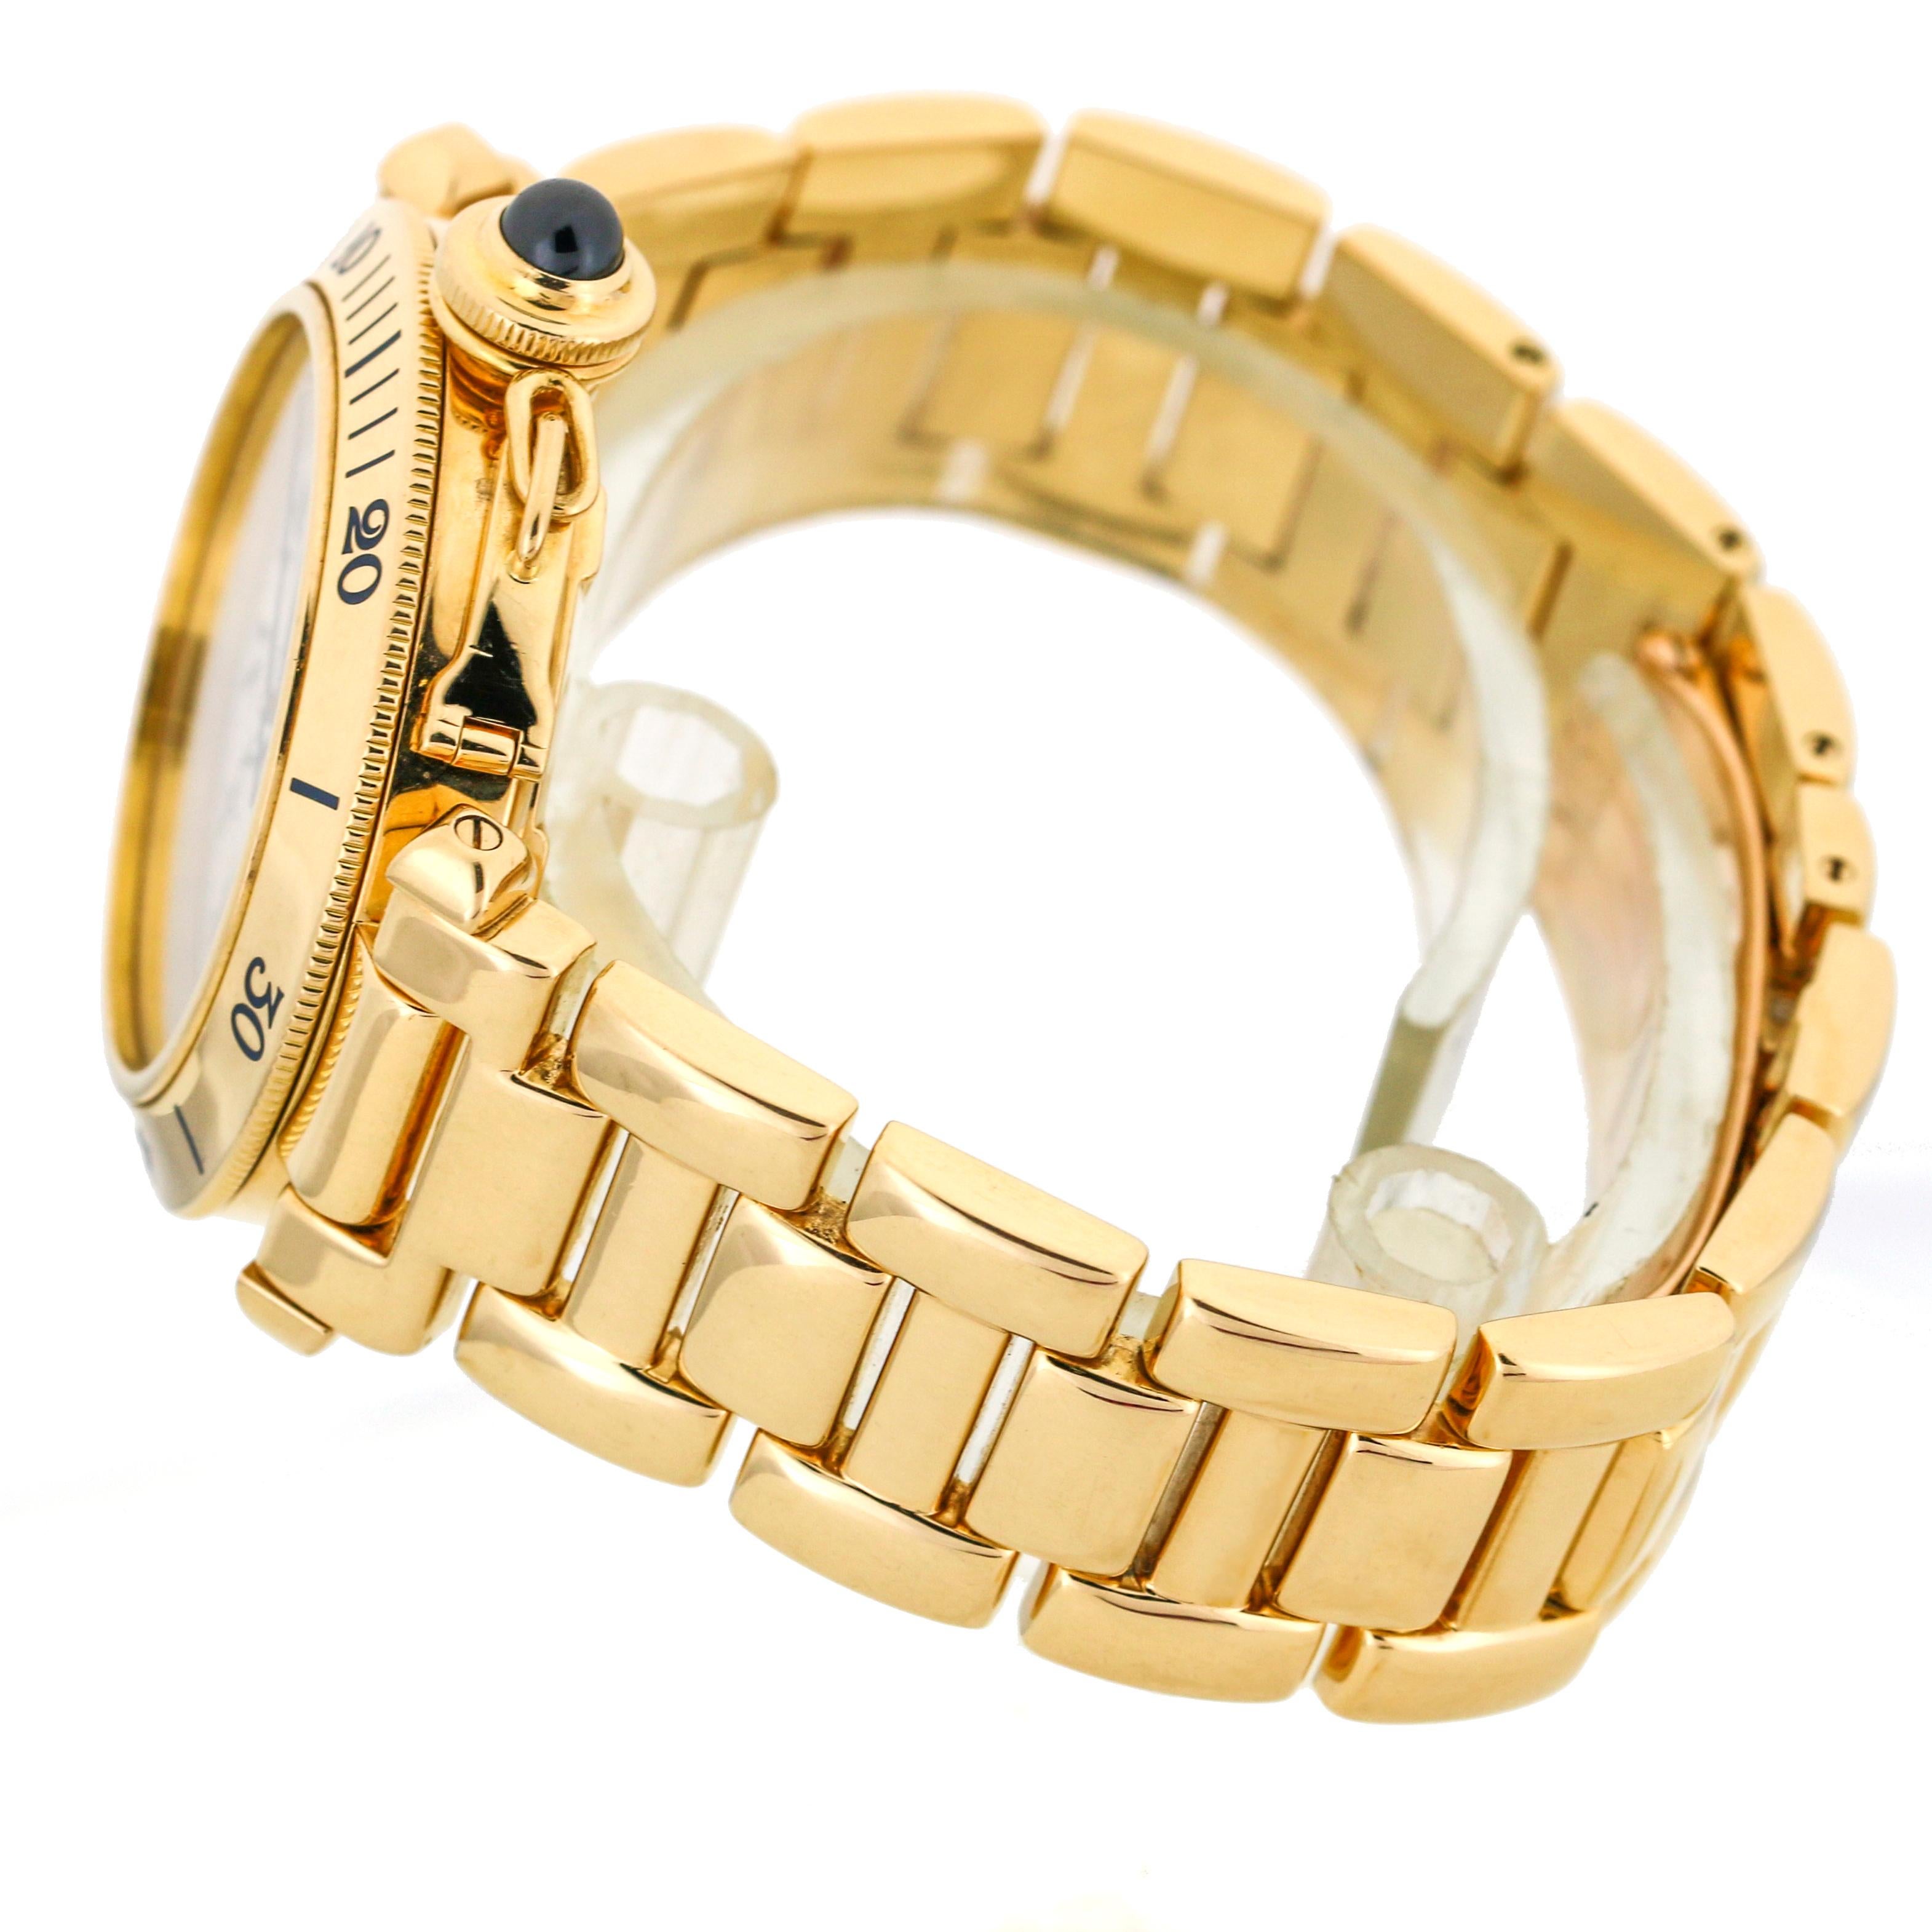 Cartier Pasha 18 Karat Yellow Gold Automatic Watch For Sale 1